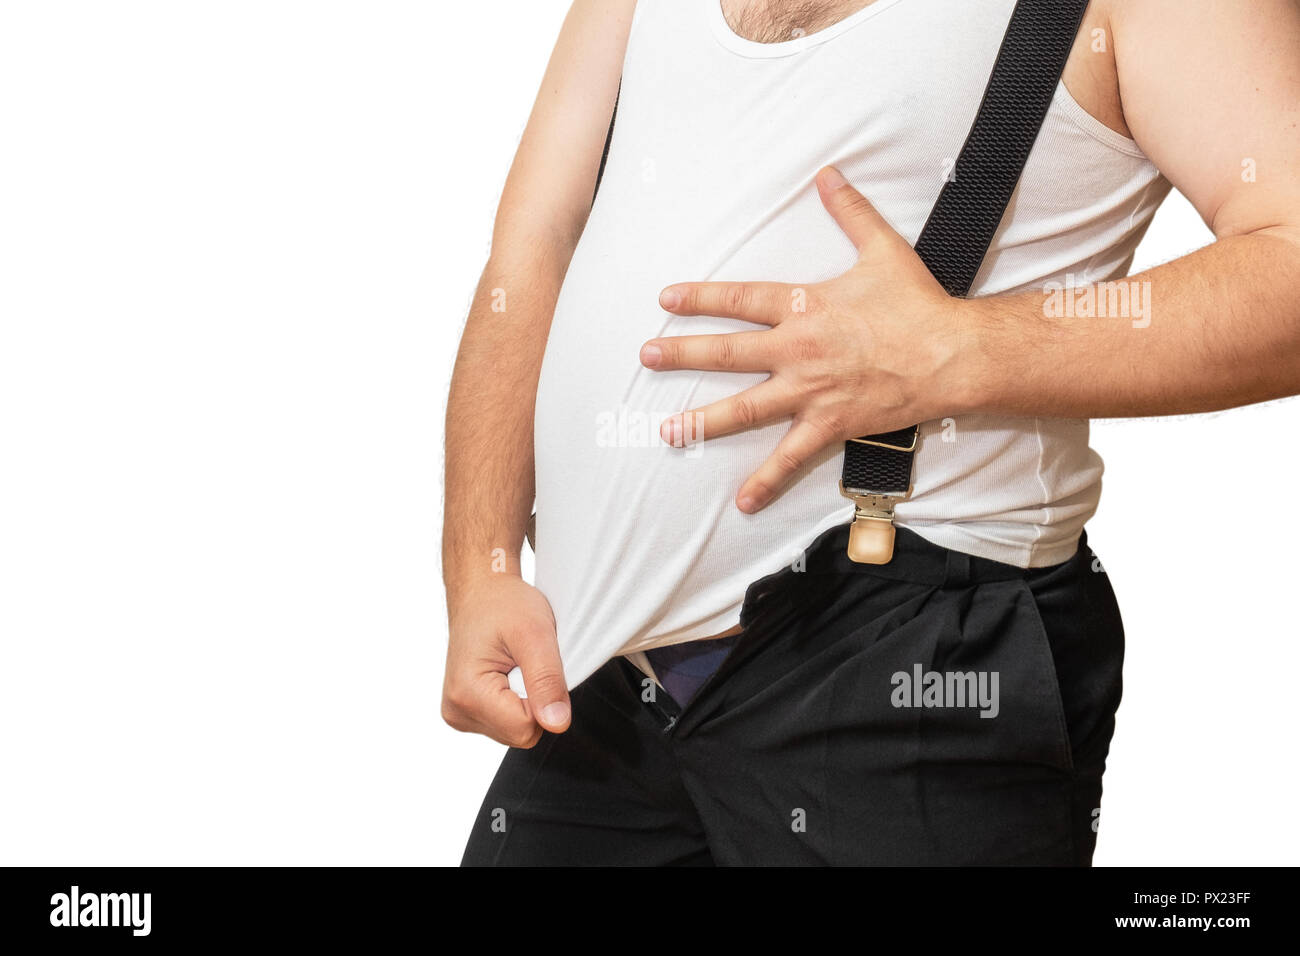 A man embraces his big belly with one hand, and the other pulls on his jersey showing his size. A man's big belly, as if to say it's time to lose weig Stock Photo